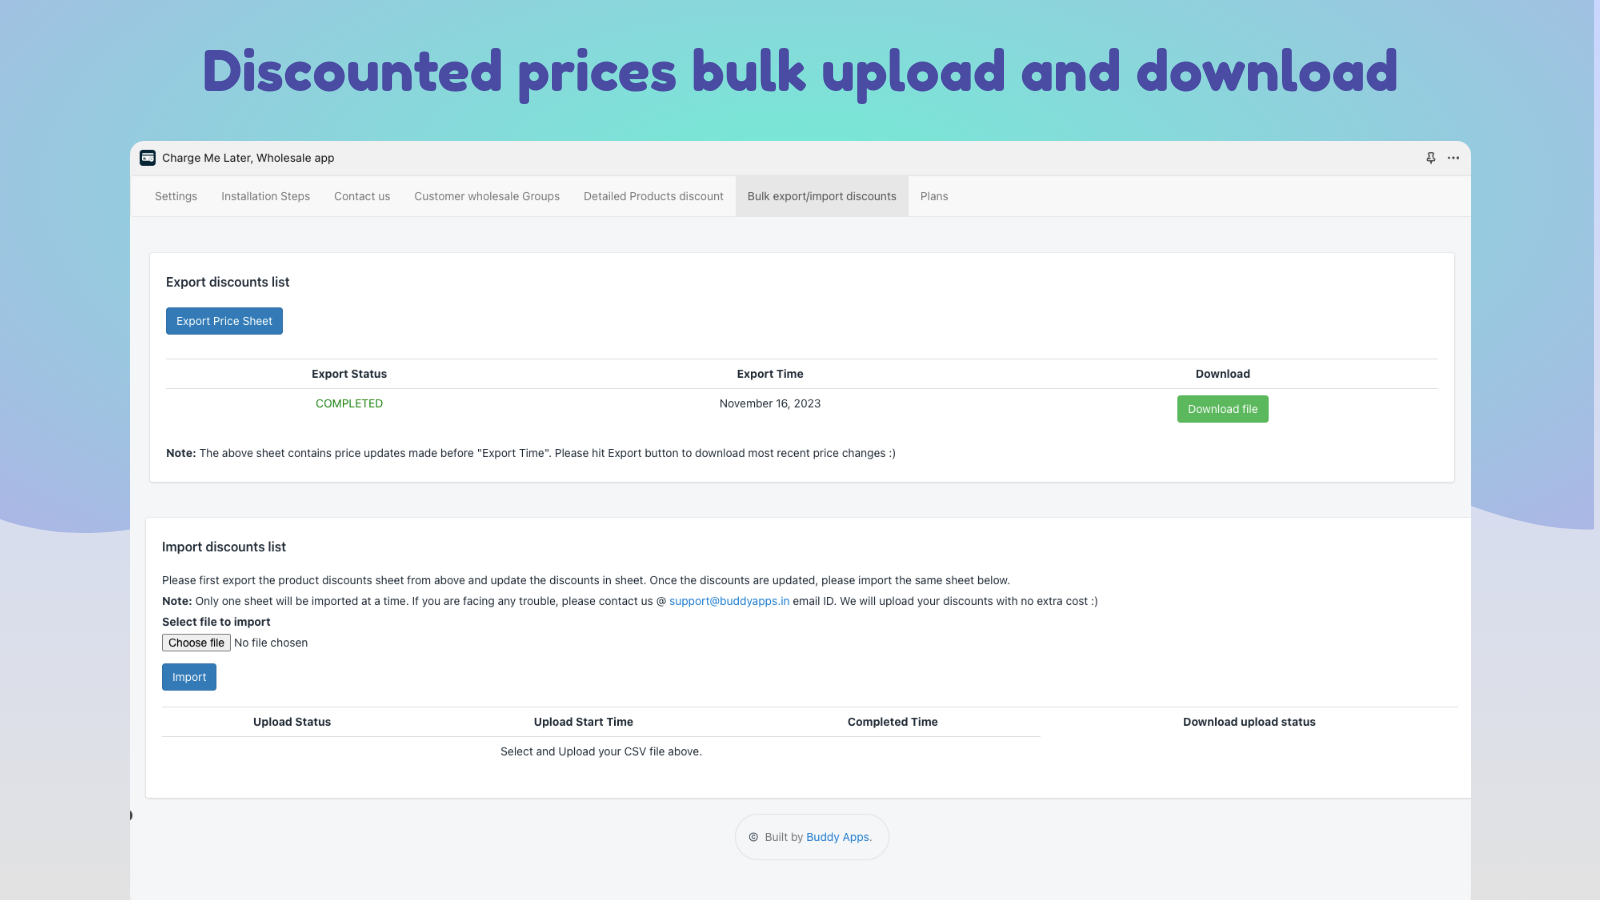 Discounted prices bulk upload and download